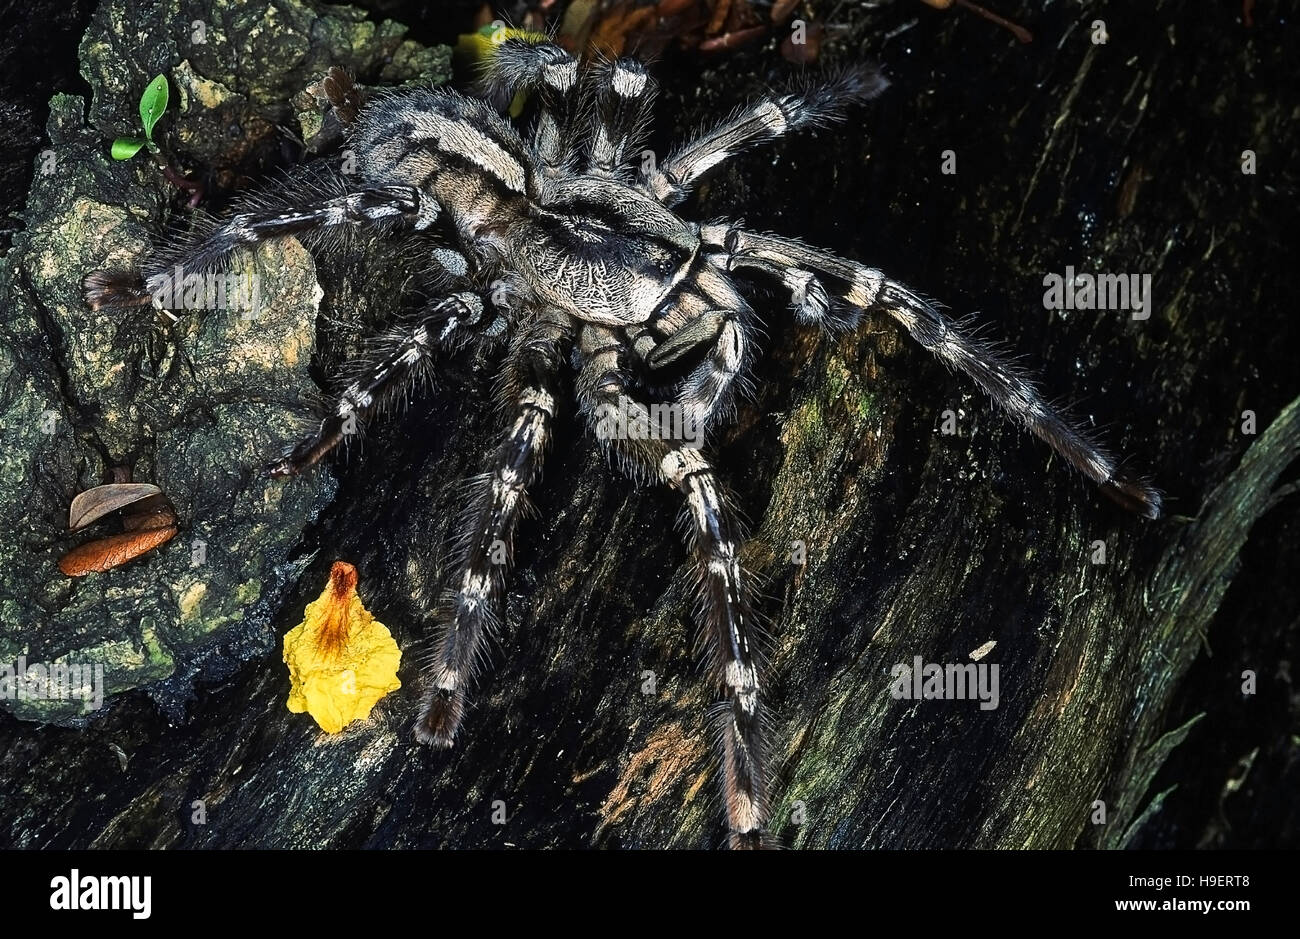 Poecilotheria regalis YELLOW-THIGHED SPIDER. HORIZONTAL. This mygalopmorph spider is often called a tarantula, bird spider or cat spider. T Stock Photo